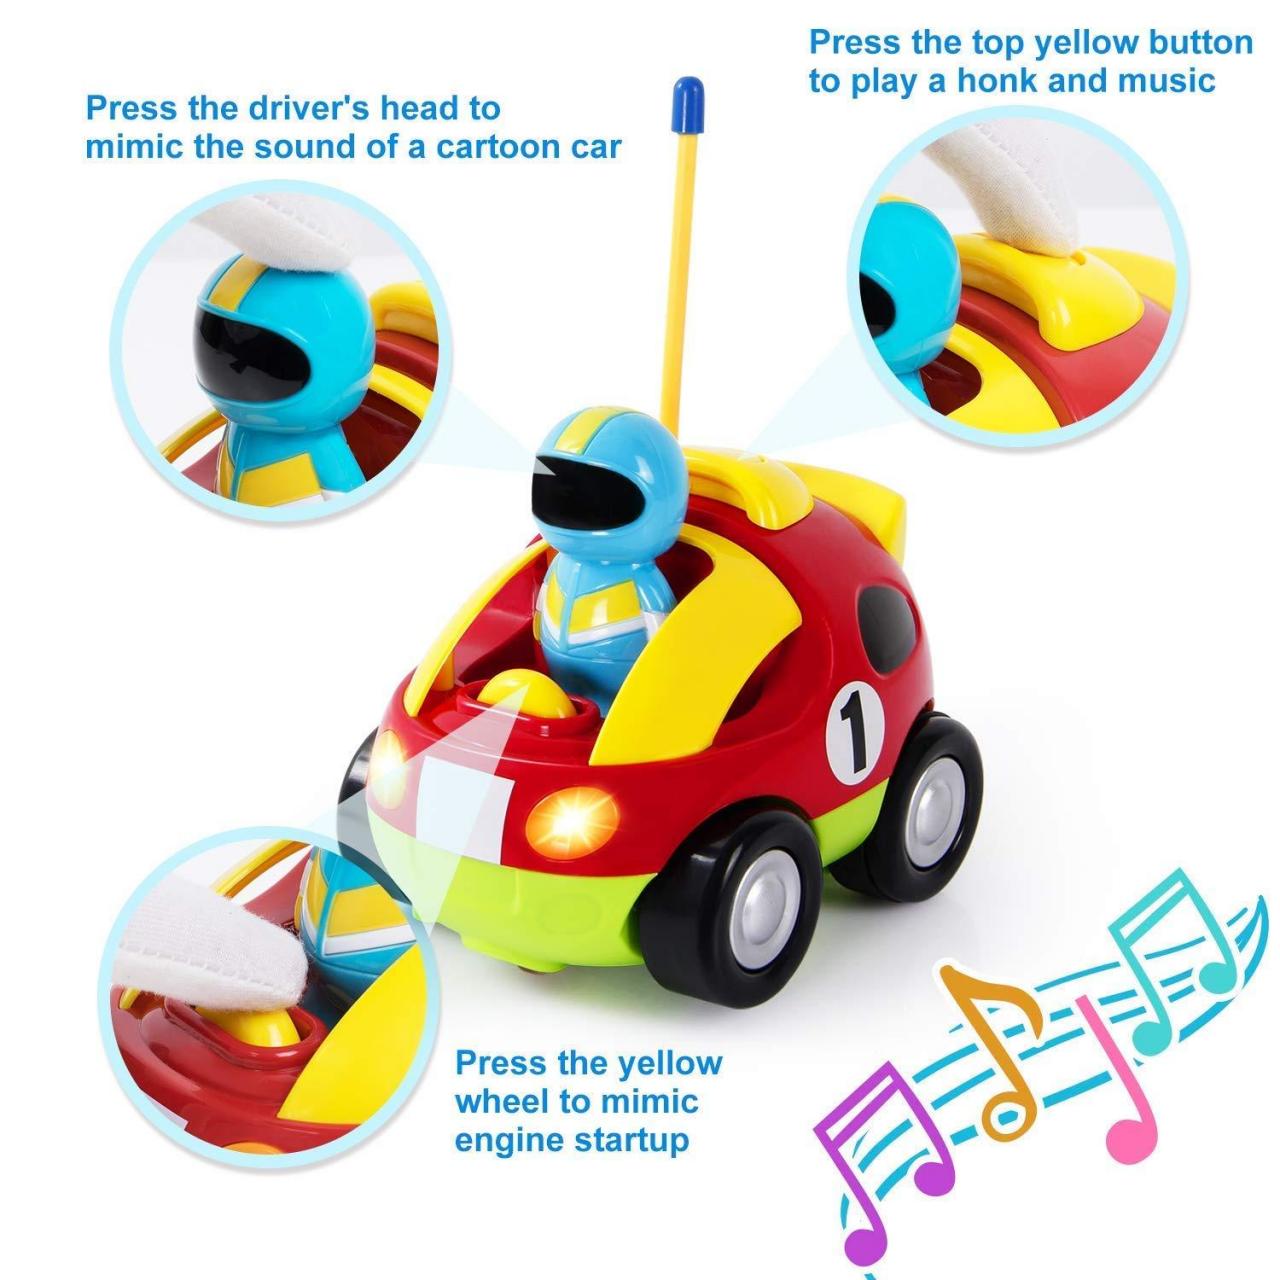 Cartoon R/C Race Car Radio Control Toy for Toddlers by Liberty Imports  (ENGLISH Packaging)